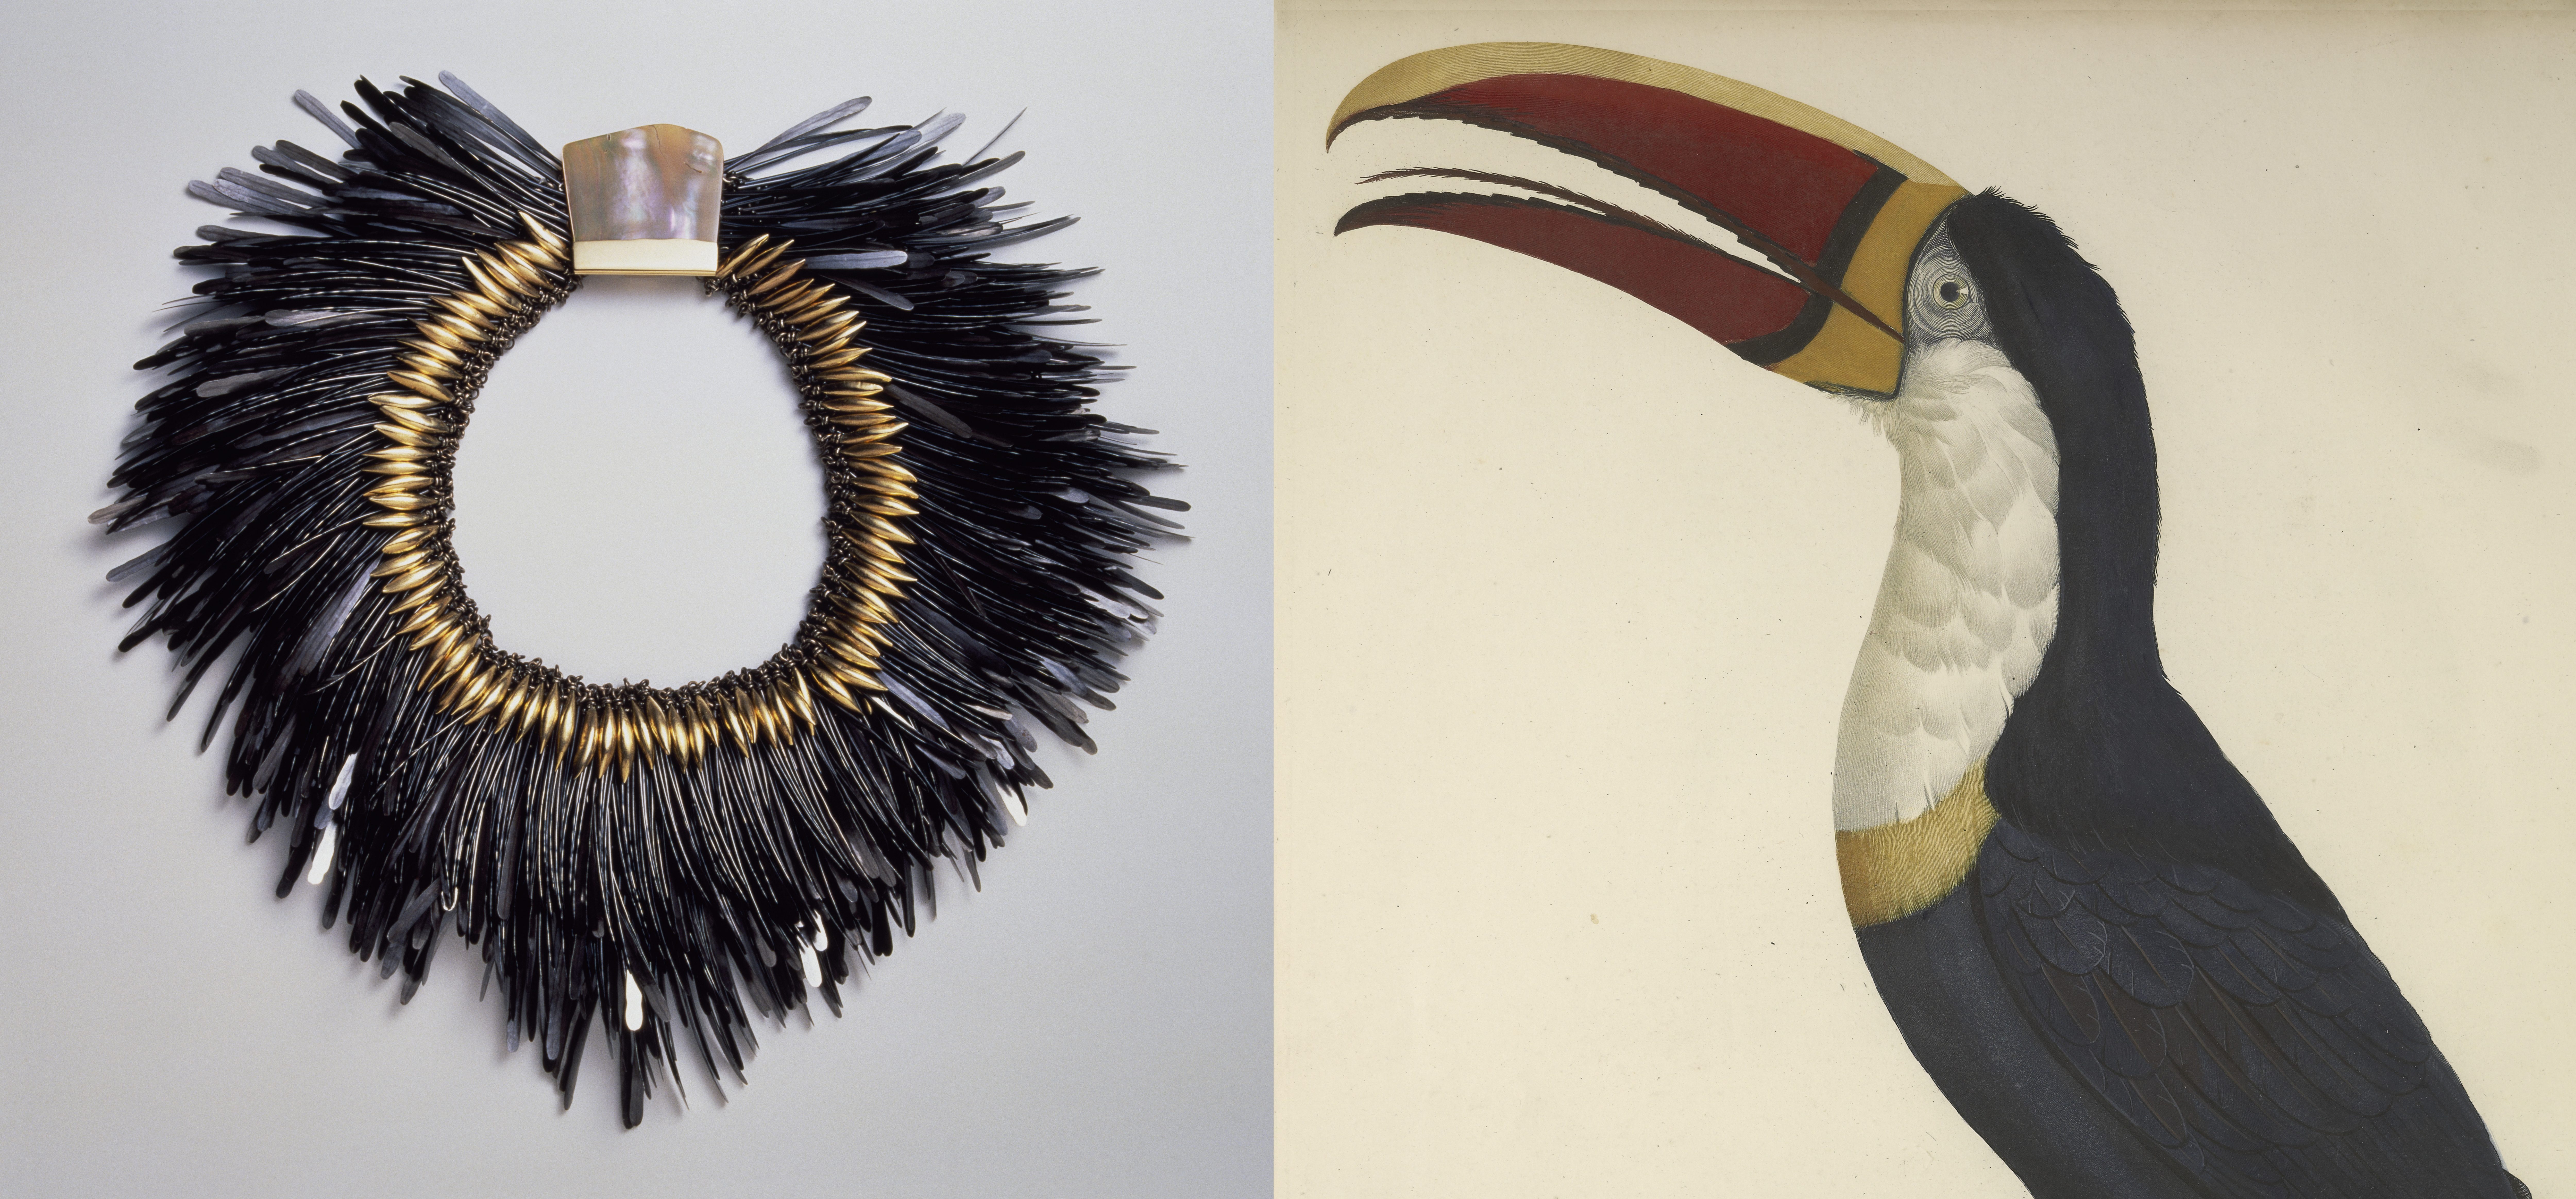 Diptych. Left, necklace designed by Tone Vigeland recreates the look of bird feathers through the use of flattened nails. Right, historic illustration of a bird with a large red beak and black and white plumage.